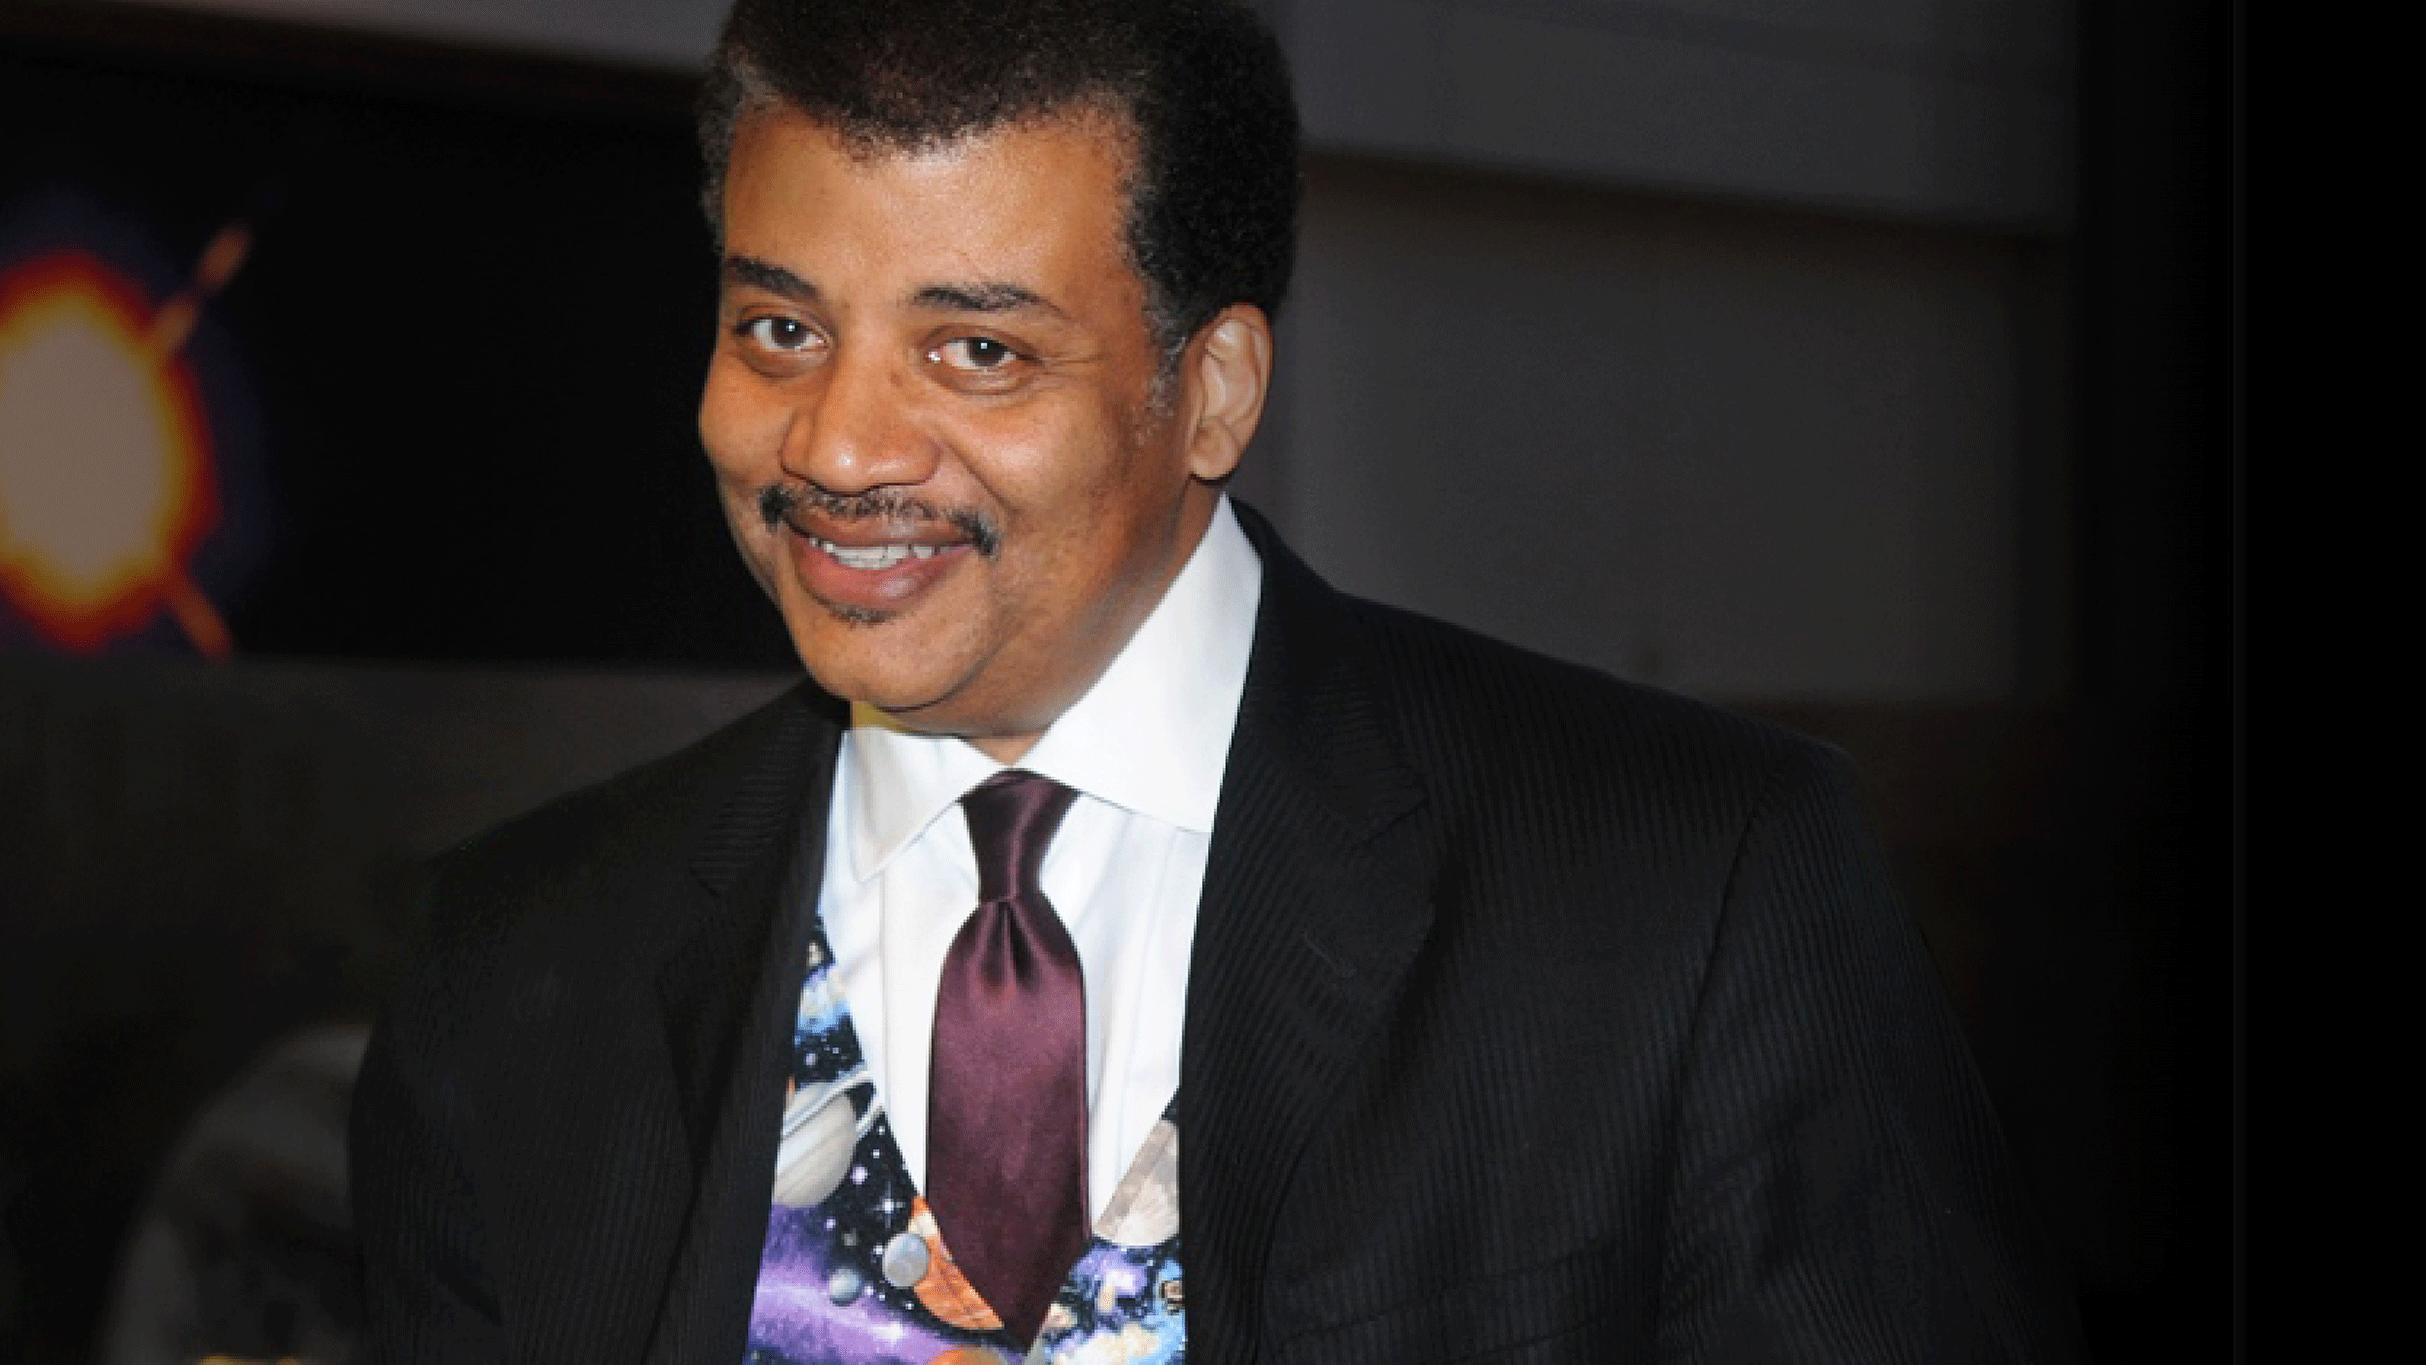 Dr. Neil deGrasse Tyson: The Search for Life in the Universe